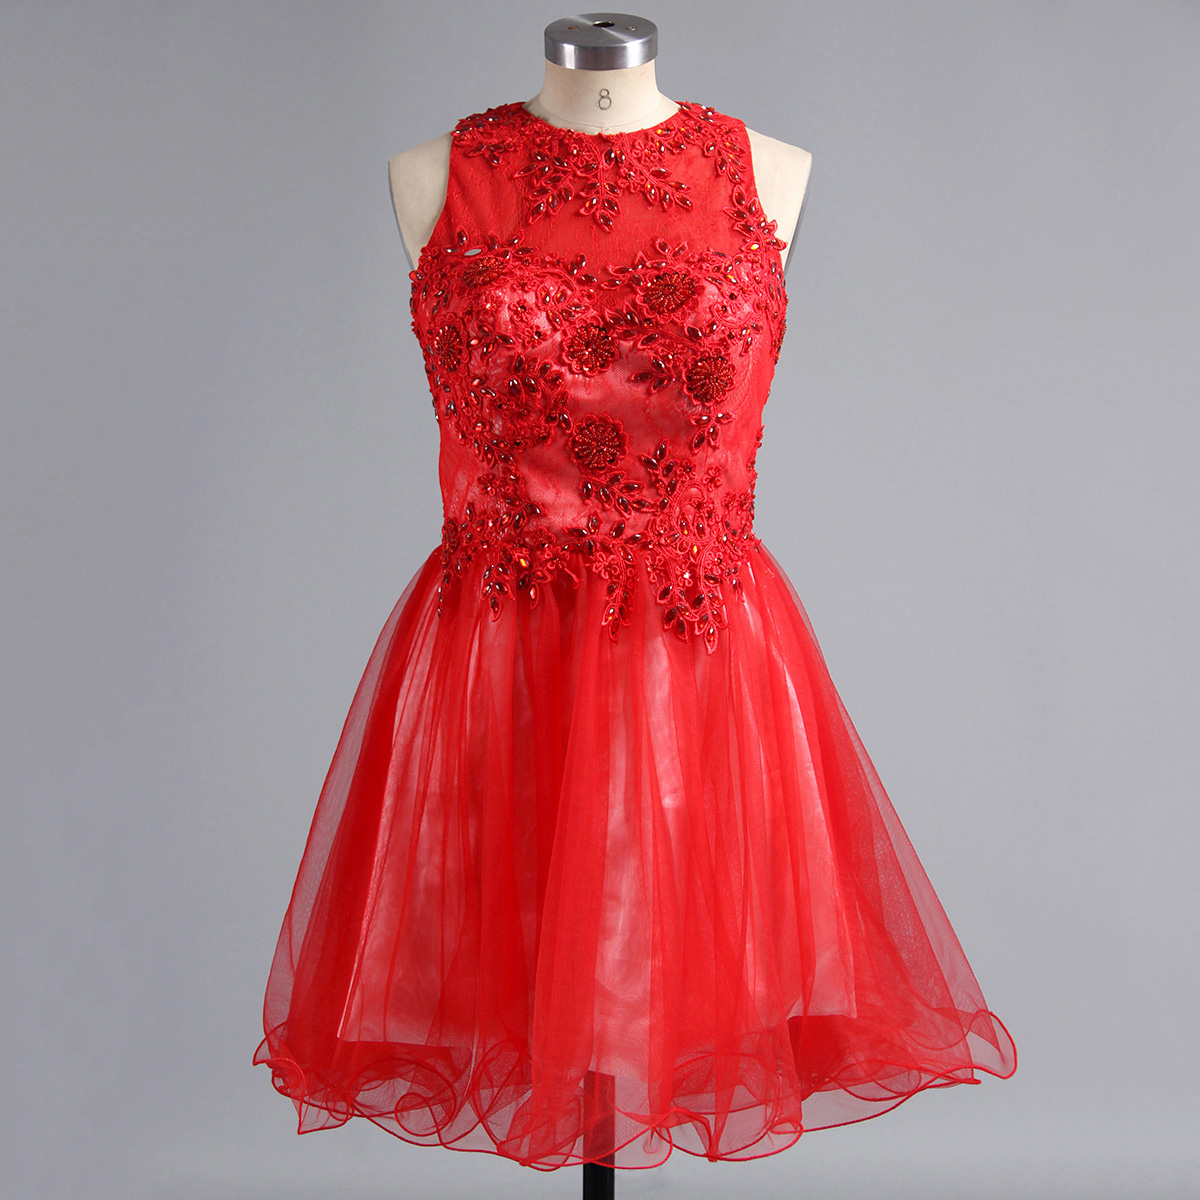 Jewel Neck Red Homecoming Dress With Lace Appliques, Key Hole Short Homecoming Dress, Open Back Mini Homecoming Dress With Beads